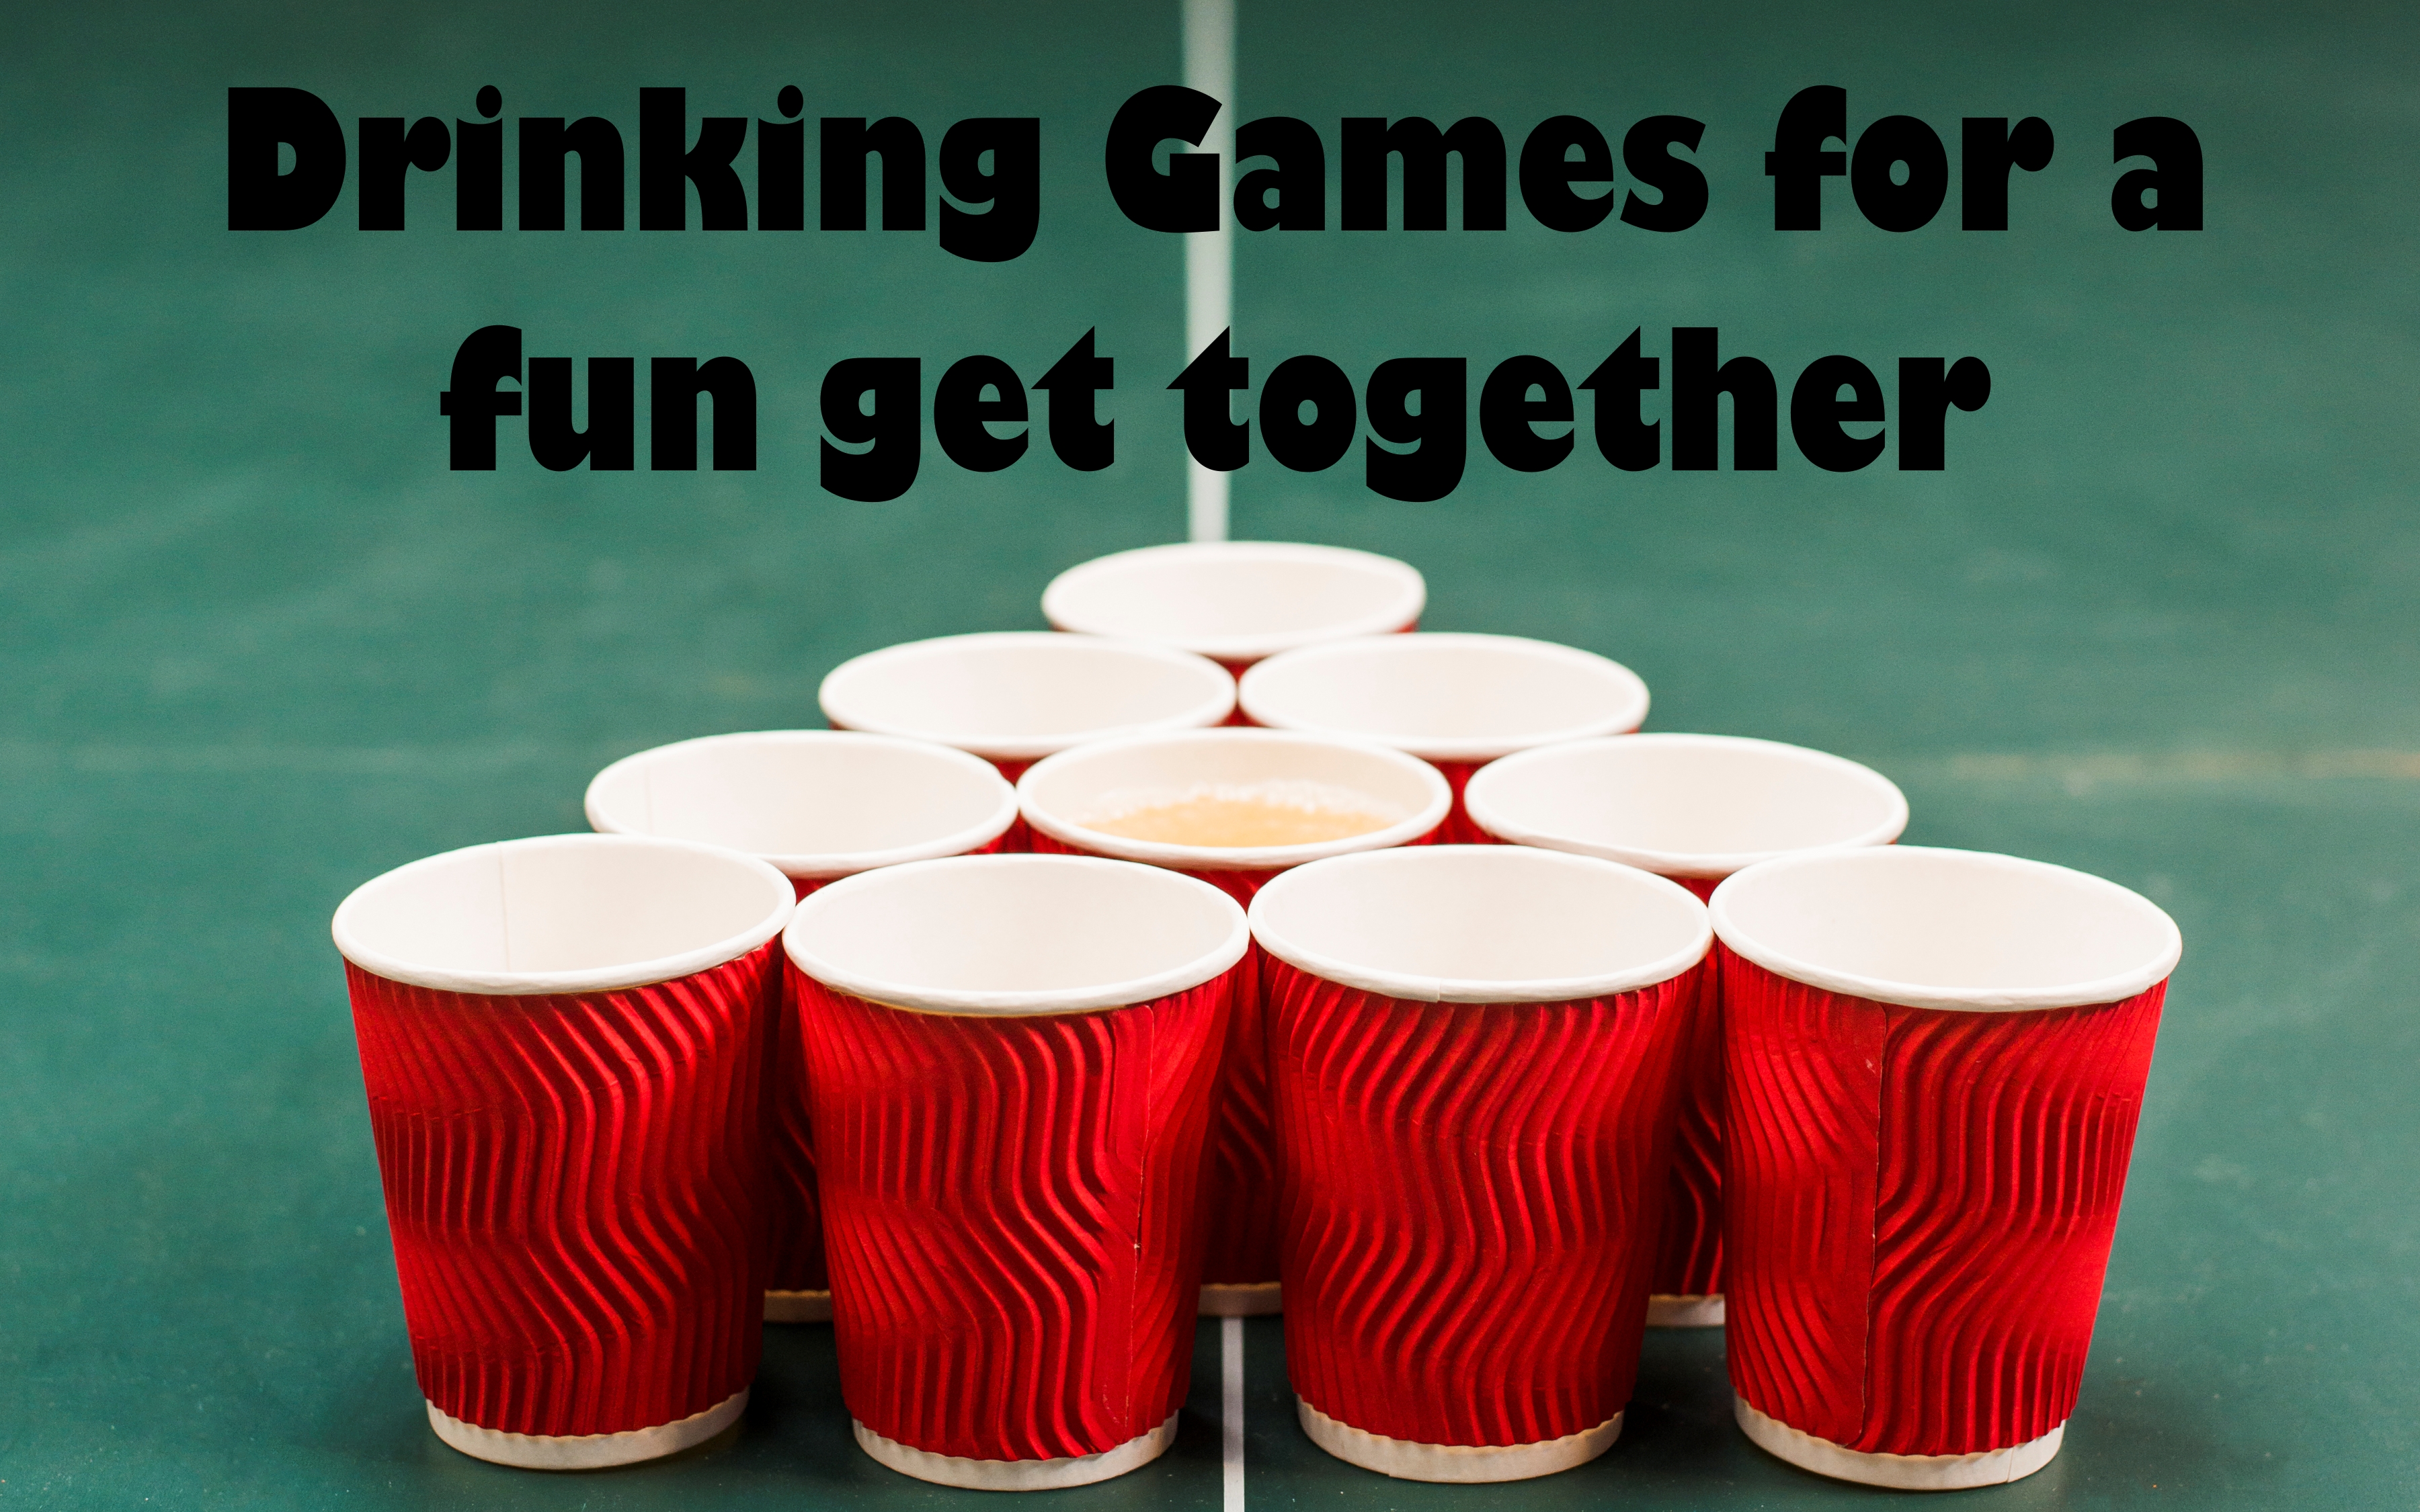 Drinking games for a fun get-to-gether